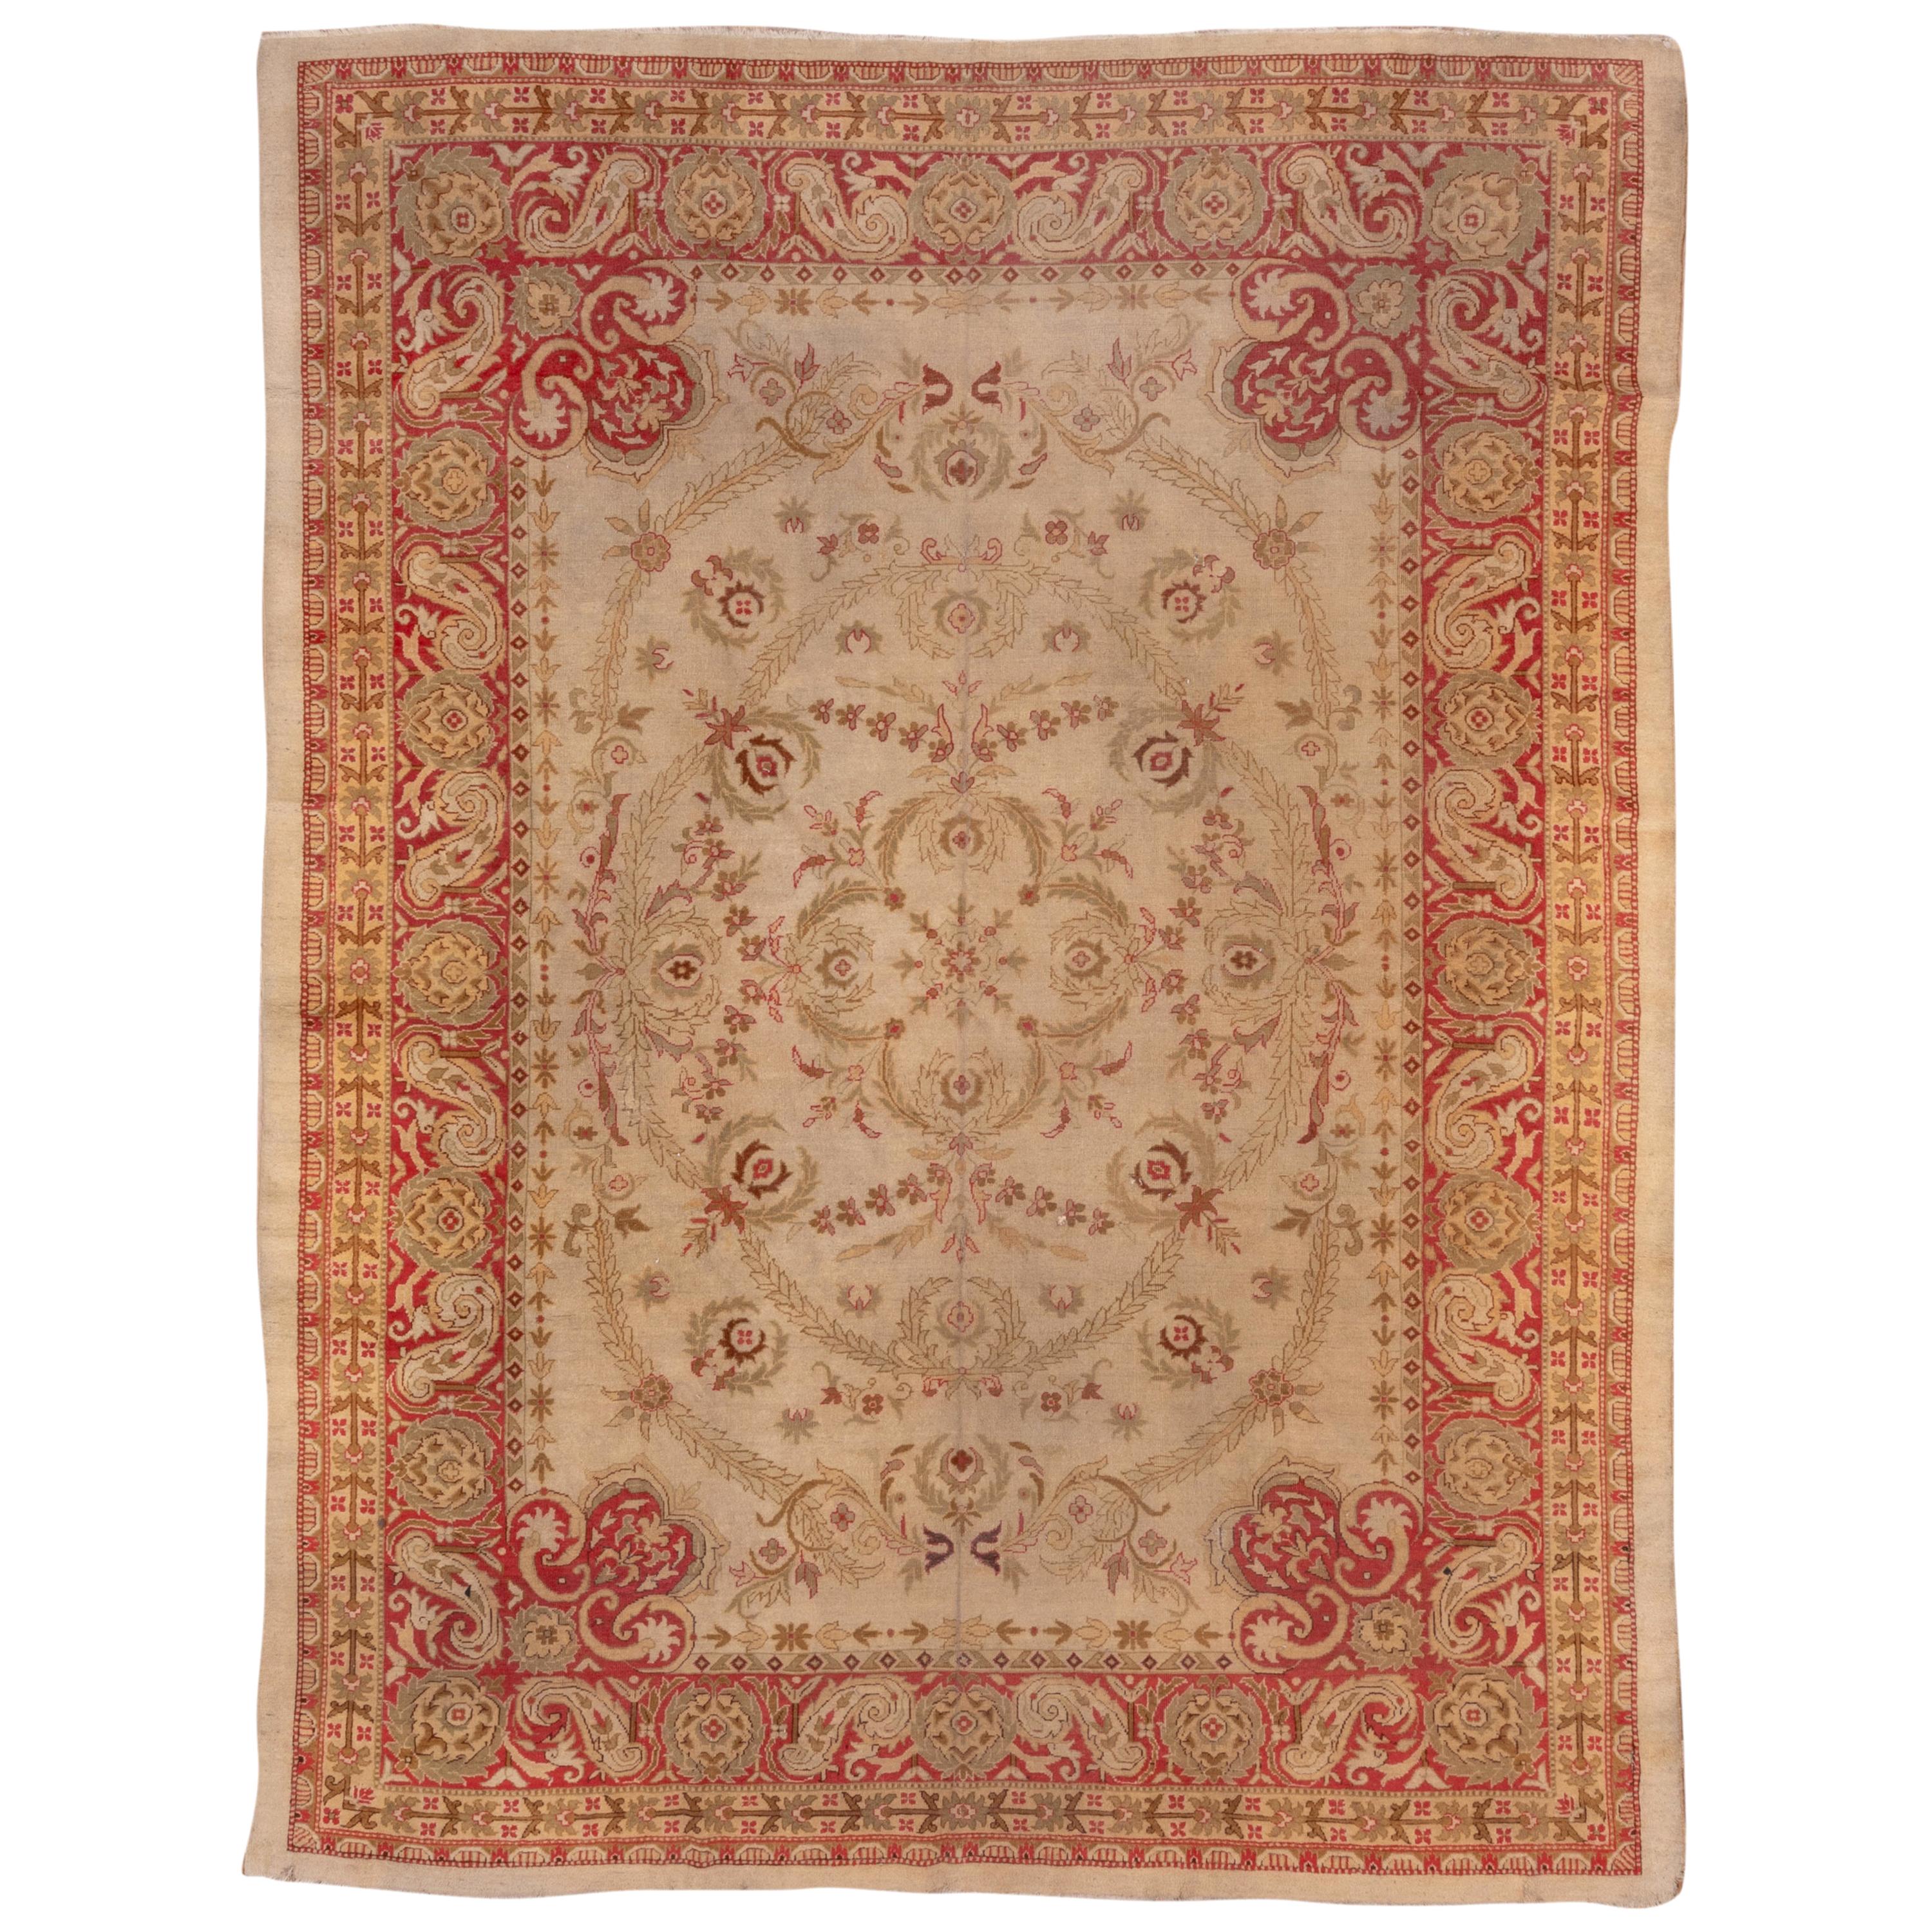 Antique Indian Agra Carpet, Yellow and Red Tones, 1910s, Red Border For Sale